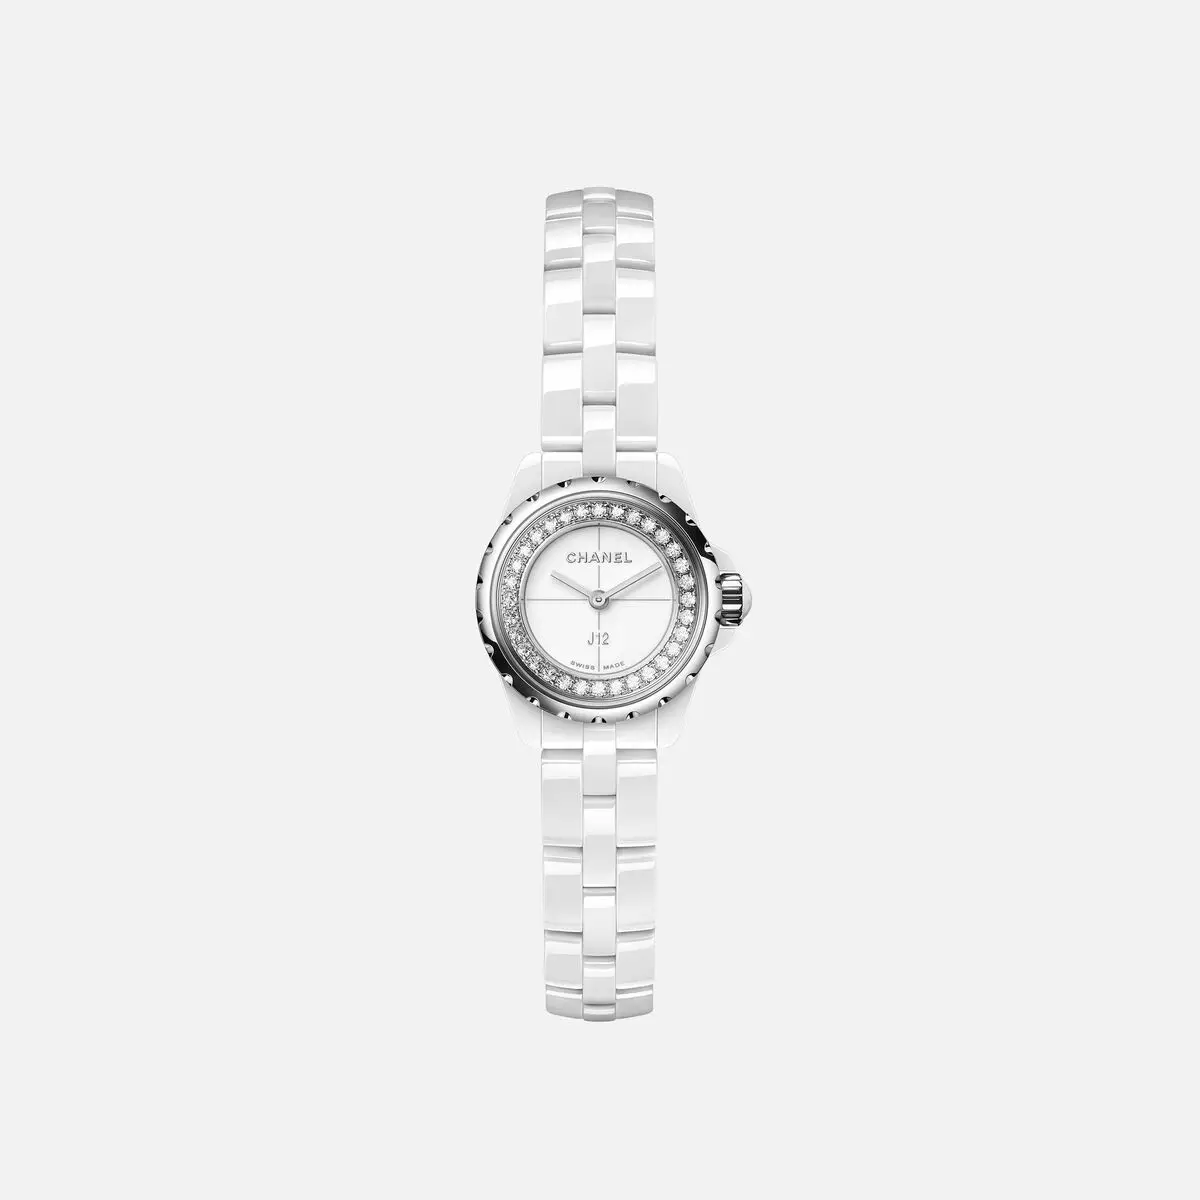 Women's clock with a ceramic bracelet (73 photos): ceramic white and black wrist models, how to shorten them and clean, reviews 3552_52